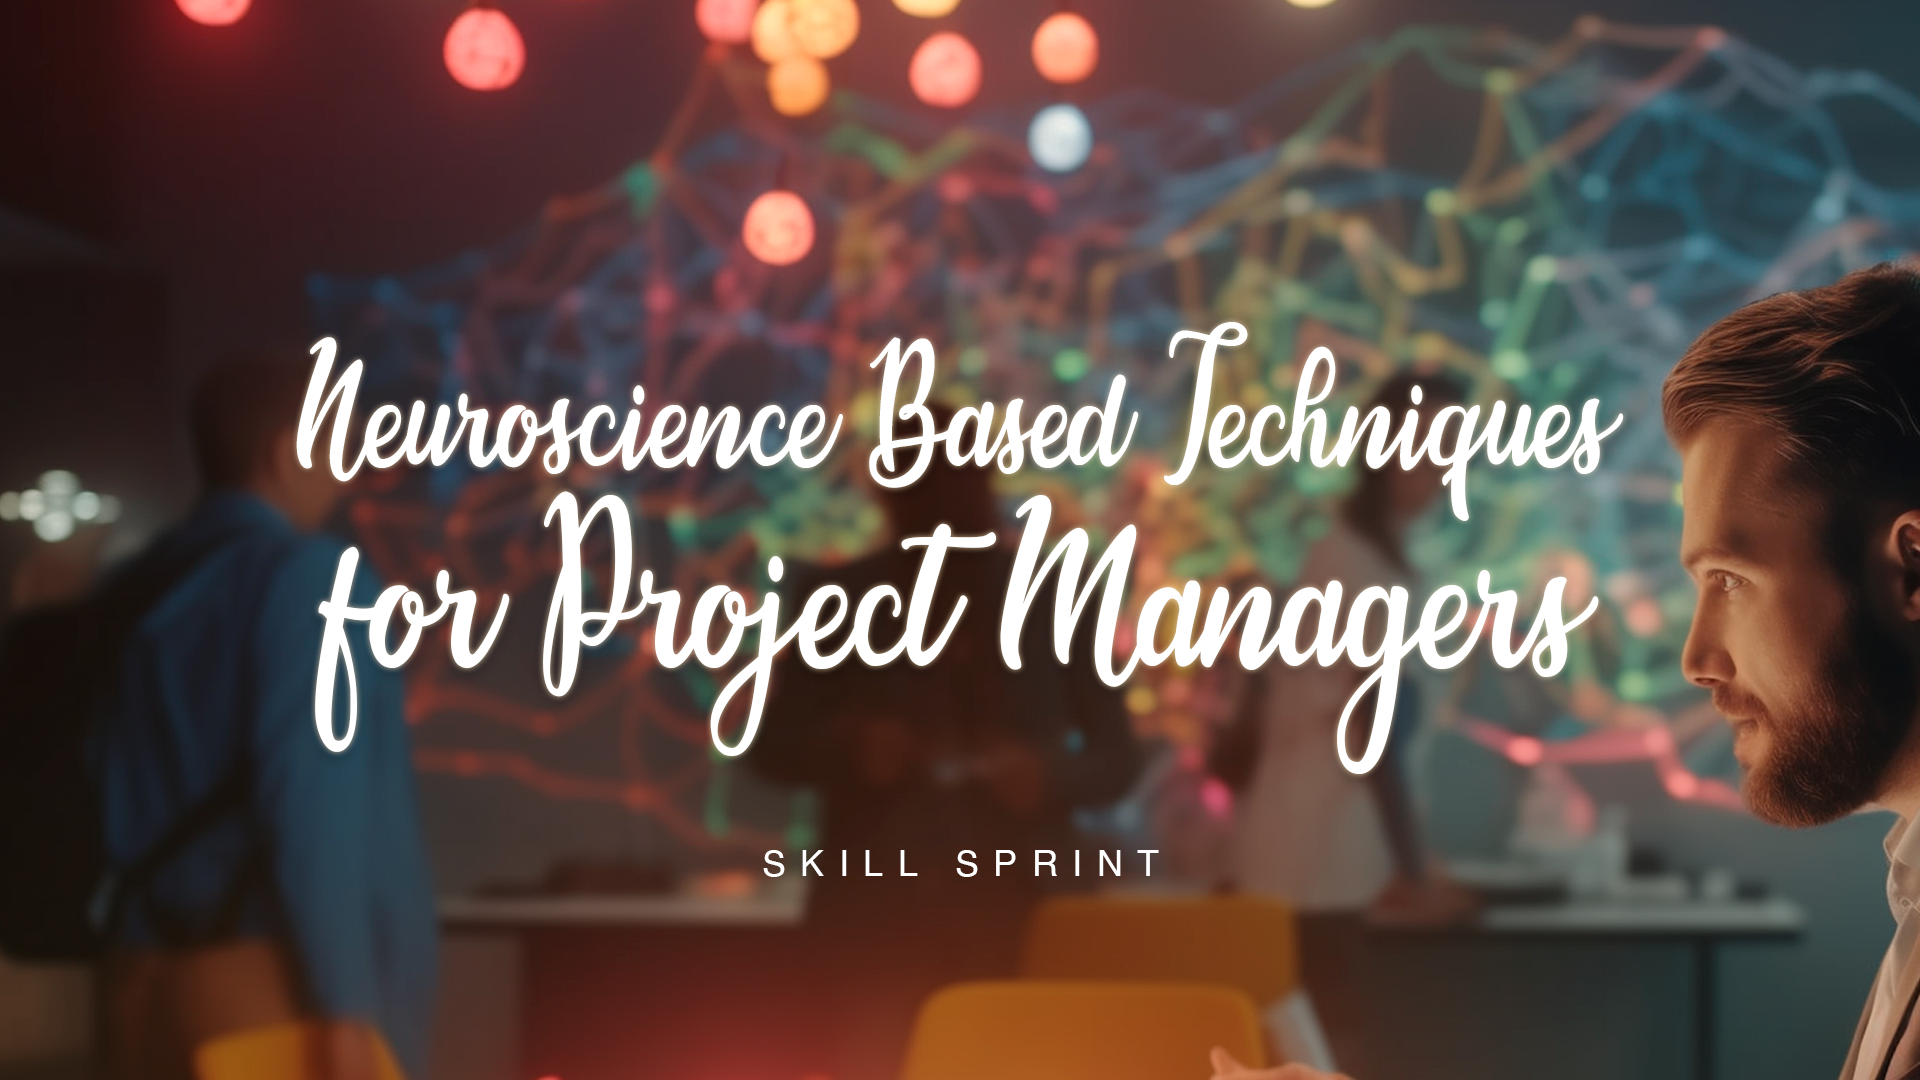 Neuroscience Based Techniques for Project Managers